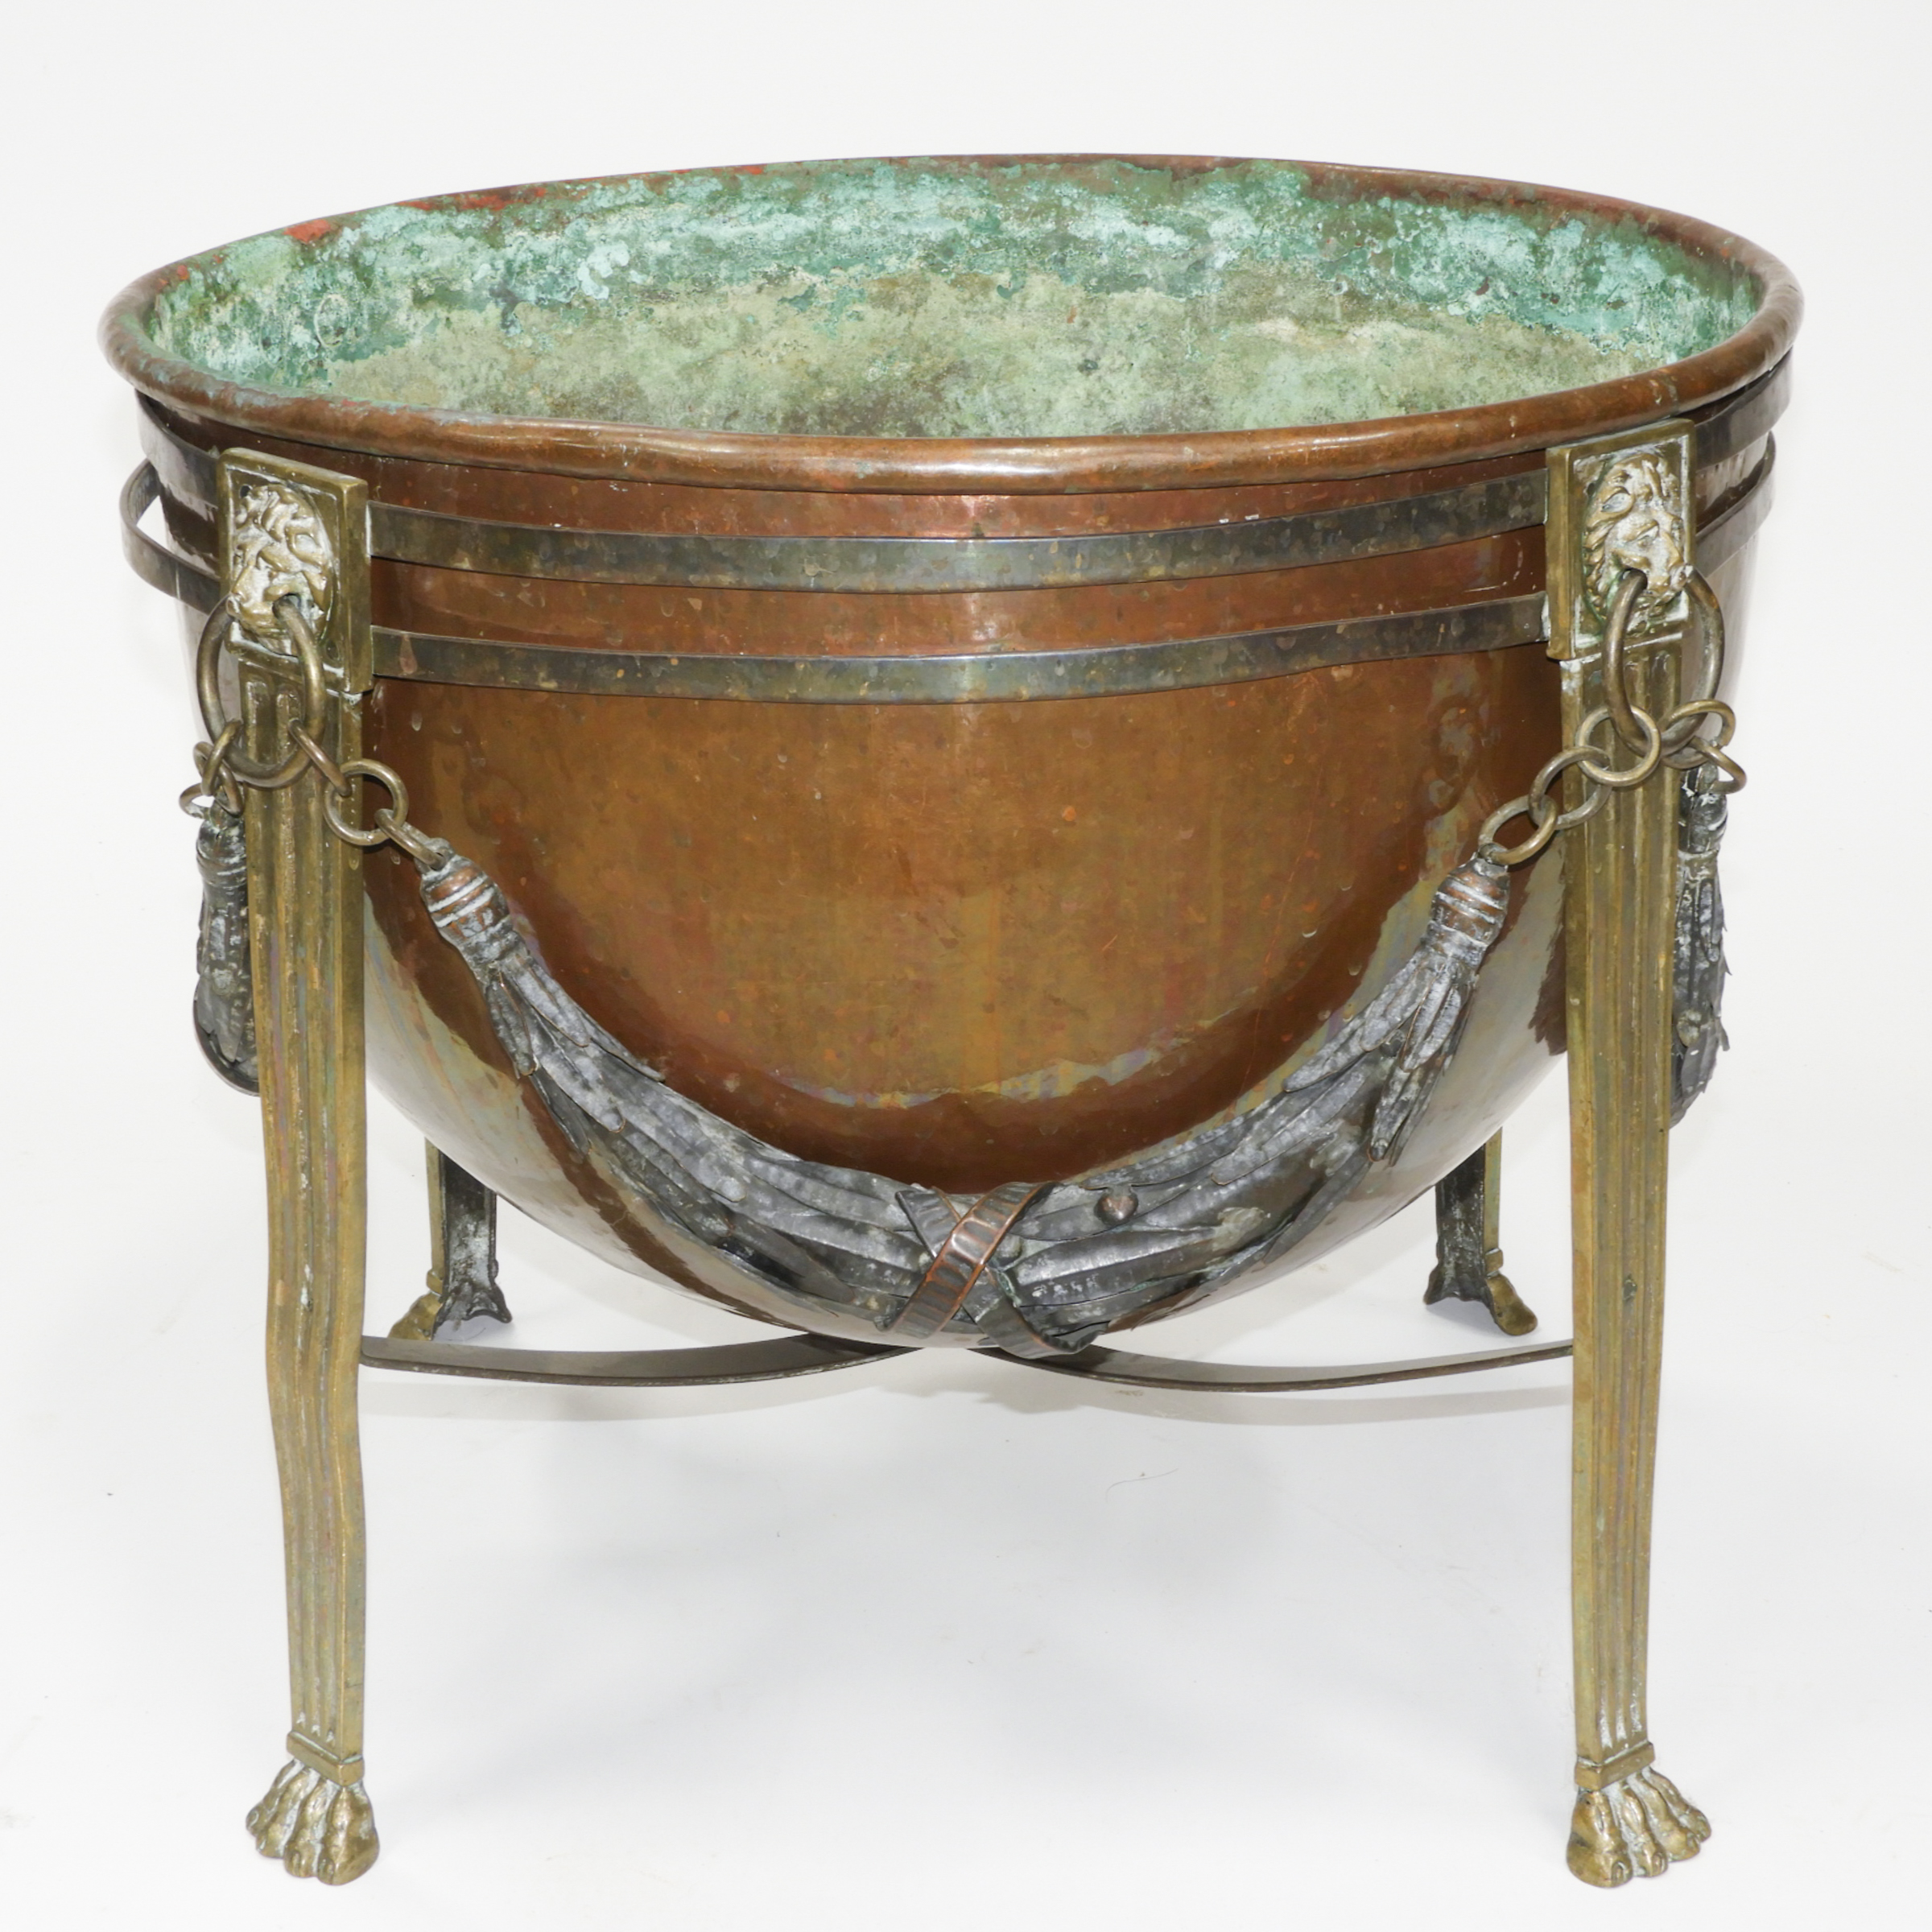 Neoclassical Cauldron Form Jardiniere on Stand, 19th century